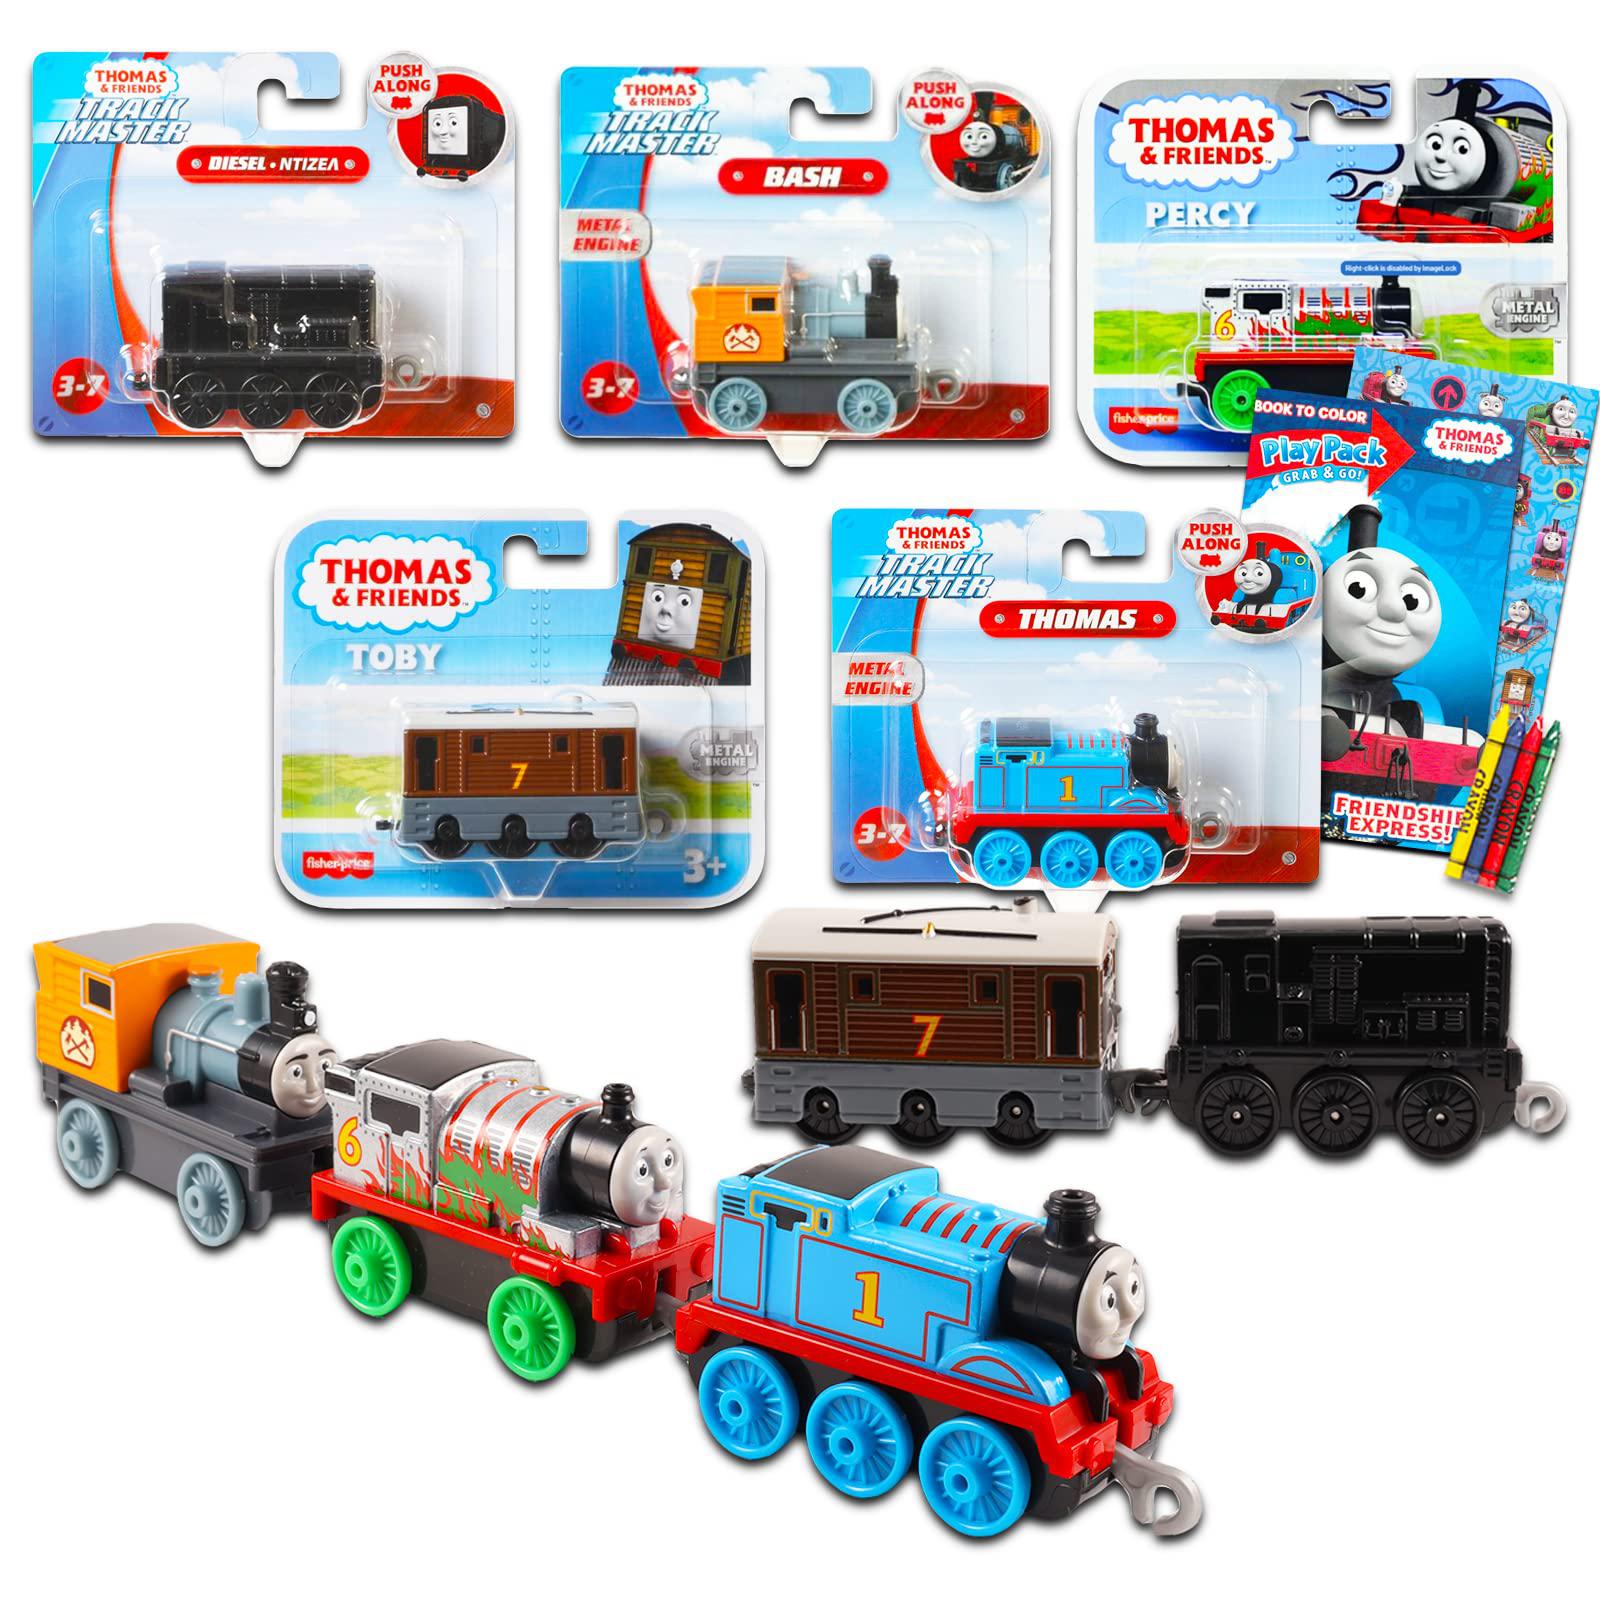 Crenstone Thomas The Train and Friends Trains Set - 5 Pc Bundle Featuring Thomas, Diesel, Percy, Bash, and Toby Plus Thomas Play P